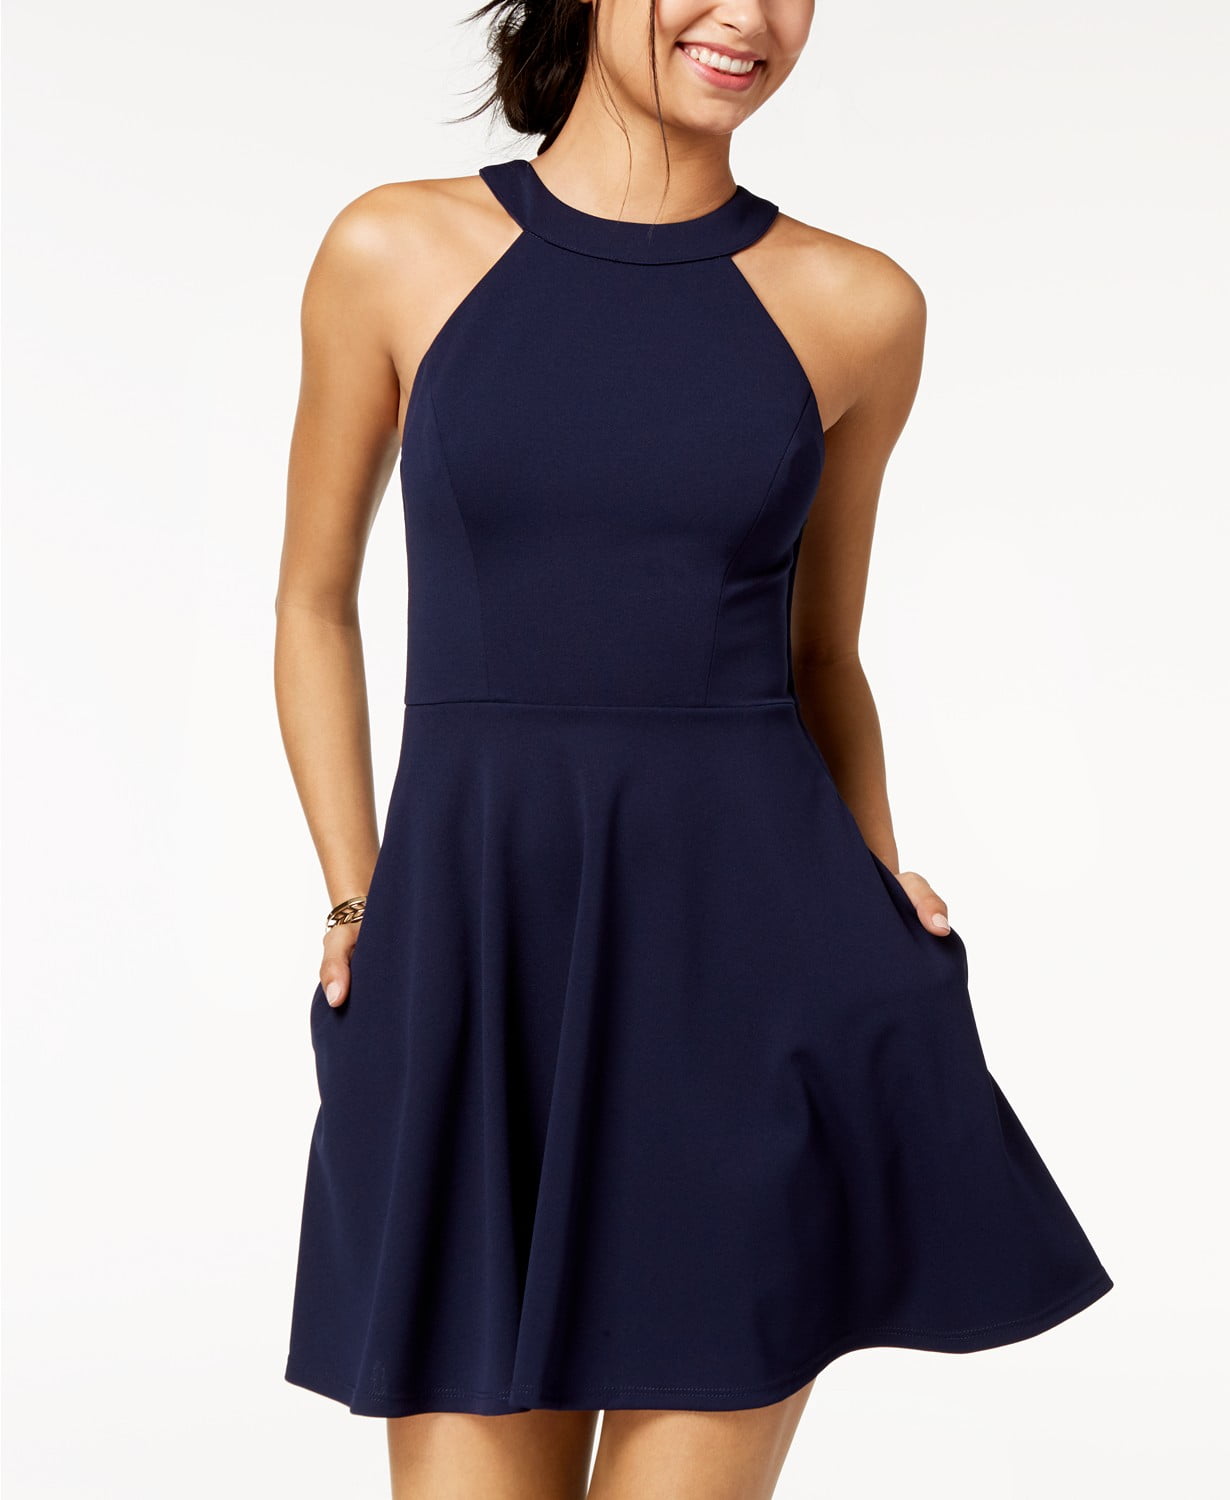 Cutout Bow Back Fit ☀ Flare Dress ...